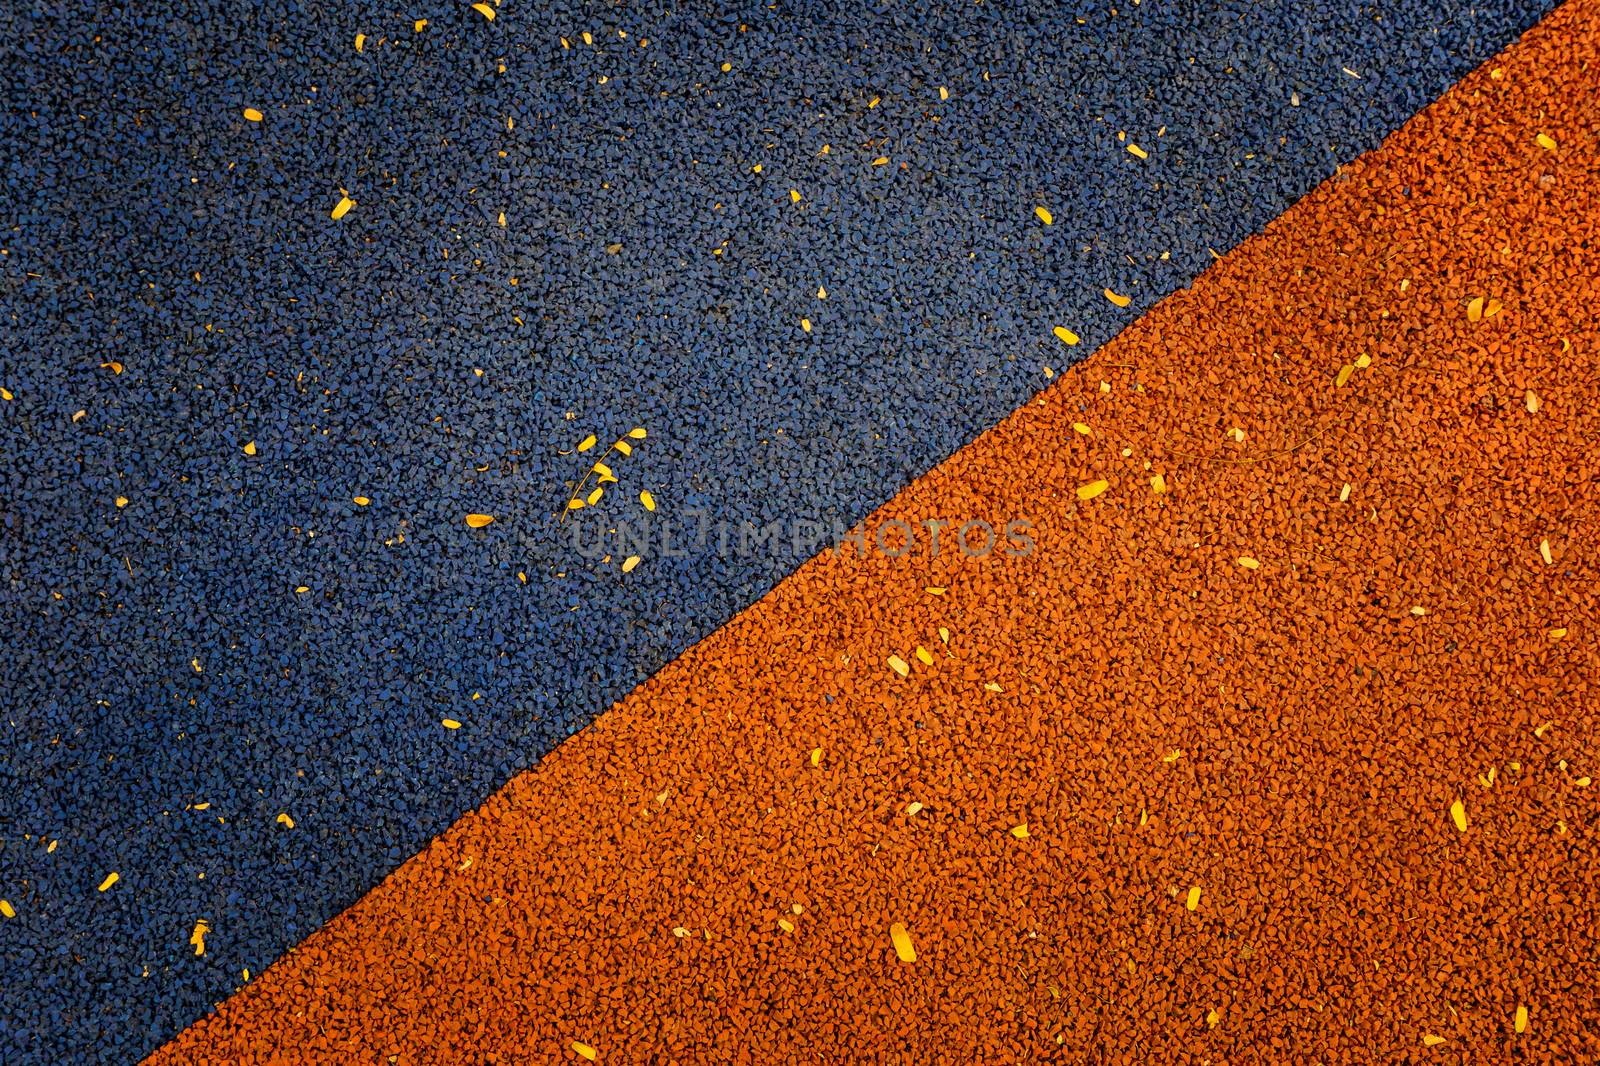 Blue and orange color of Rubber flooring Play park flooring back by pkproject